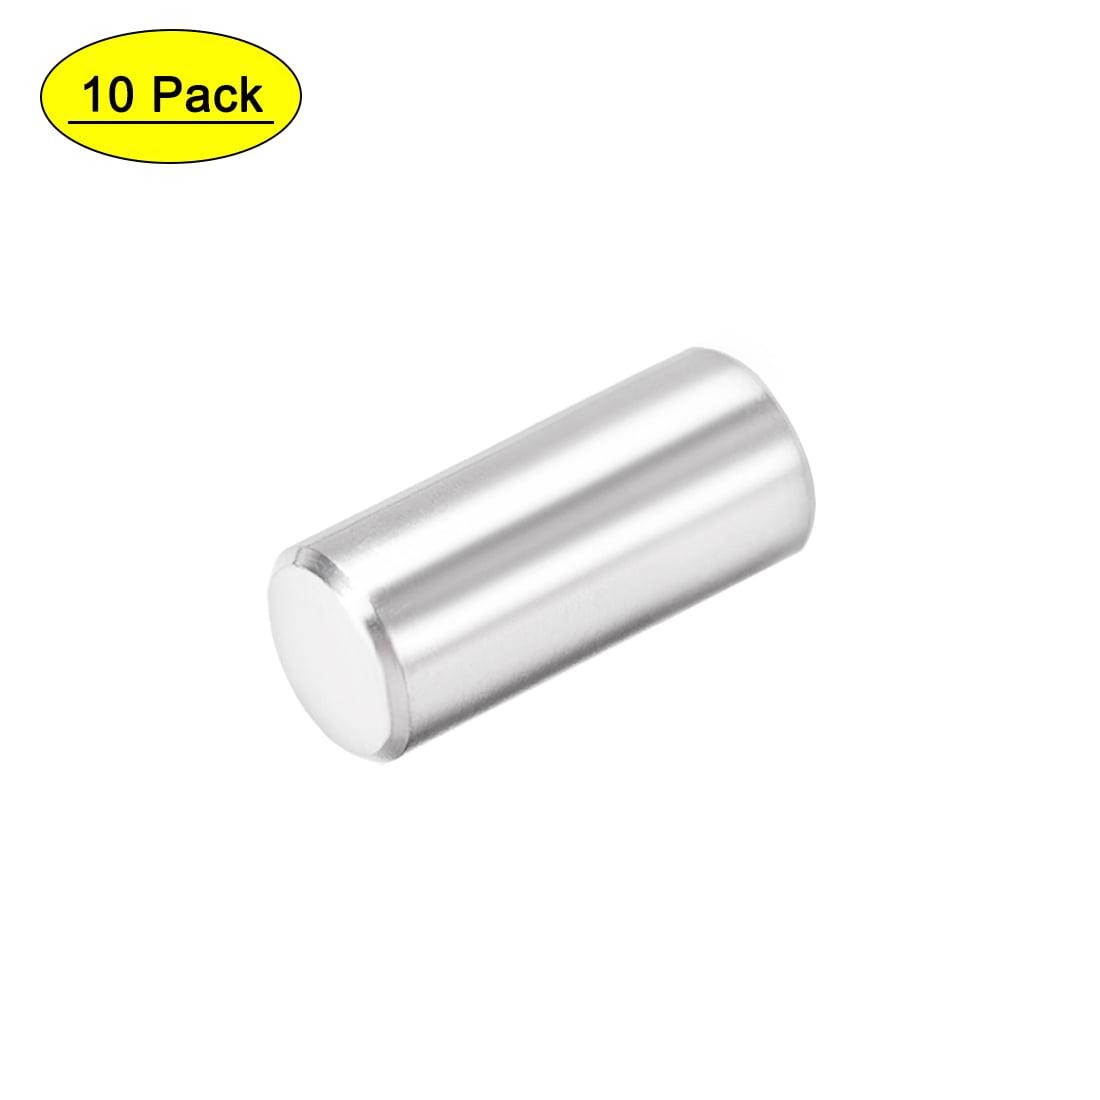 18-8 Stainless Steel Metric Dowel Pins M8 Dia x 16mm Length 10 Pieces 